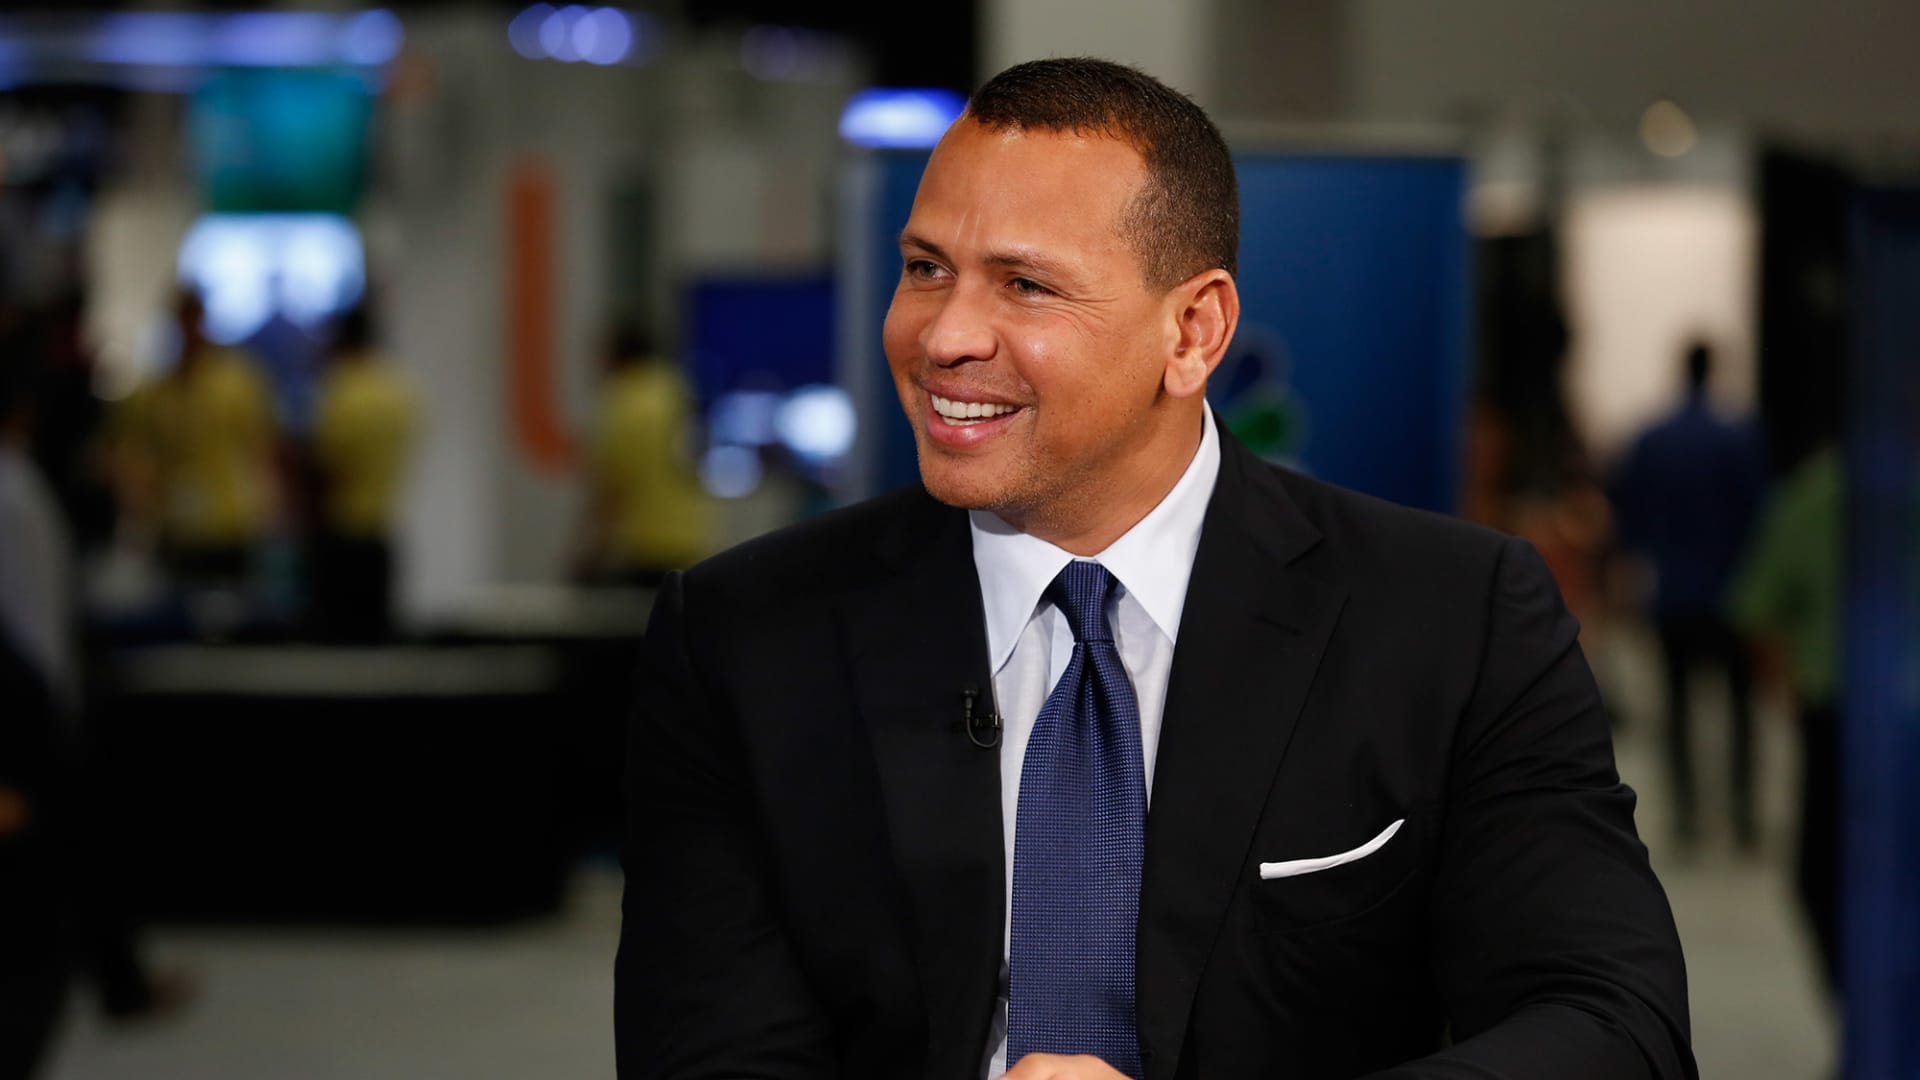 Alex Rodriguez is investing in the MMA company PFL worth $ 500 million